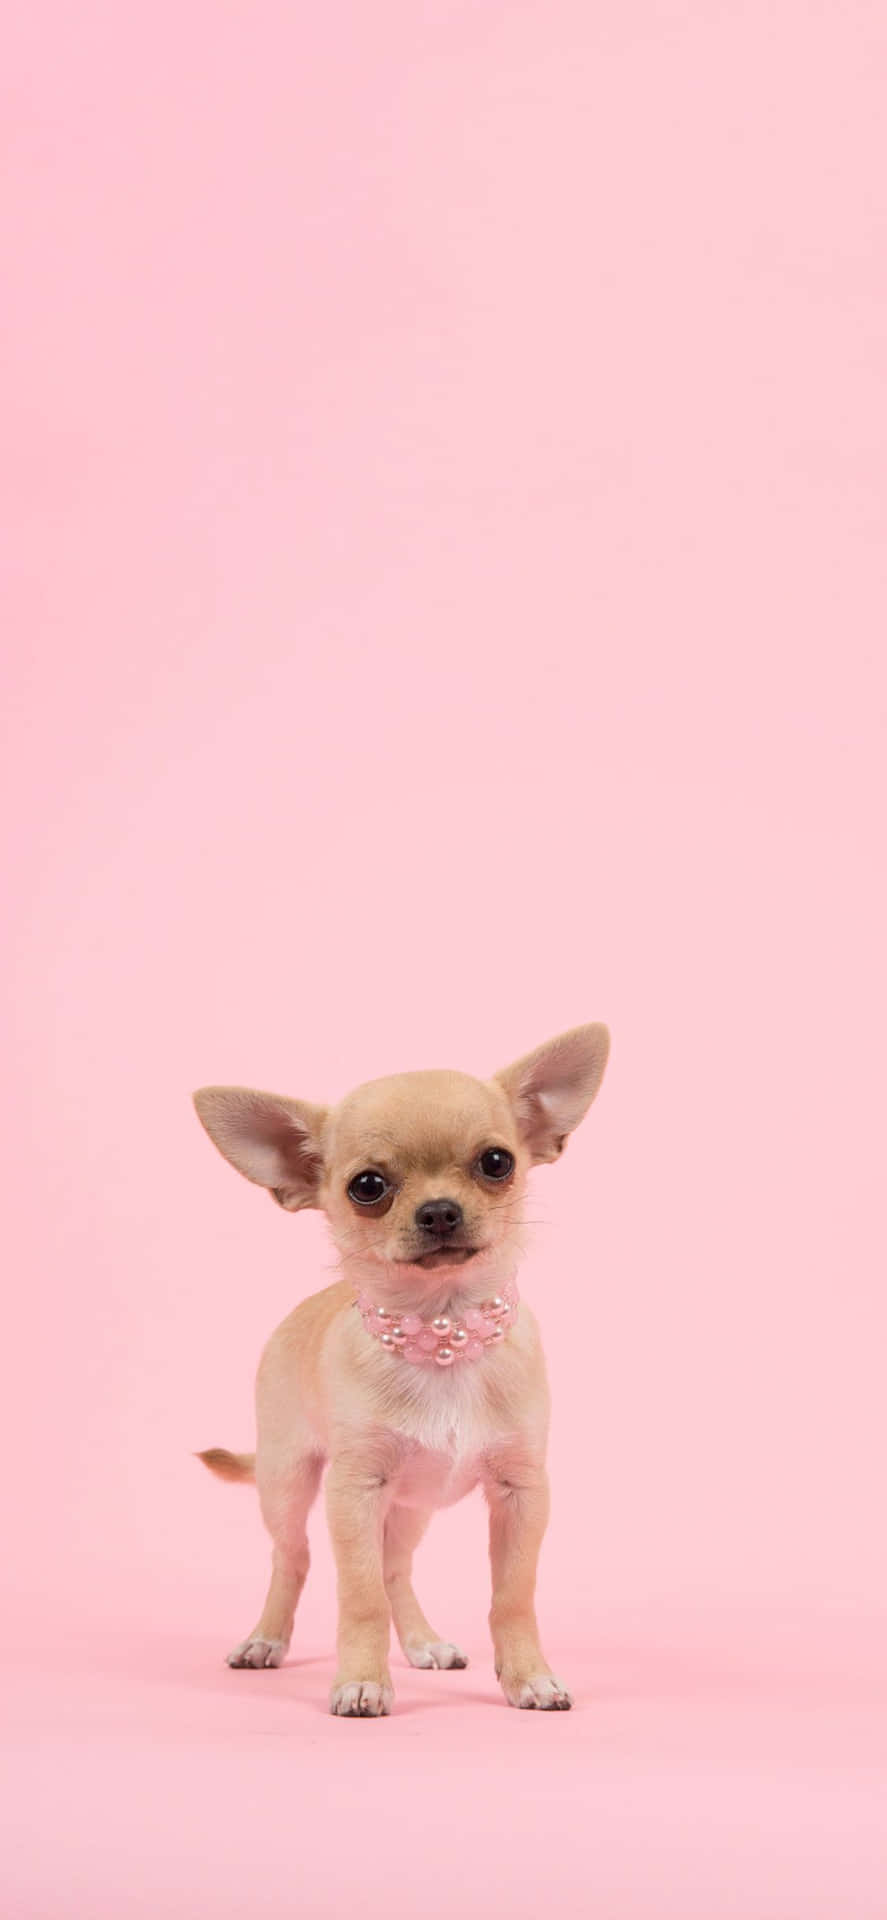 Adorable pink puppies are ready for cuddles Wallpaper